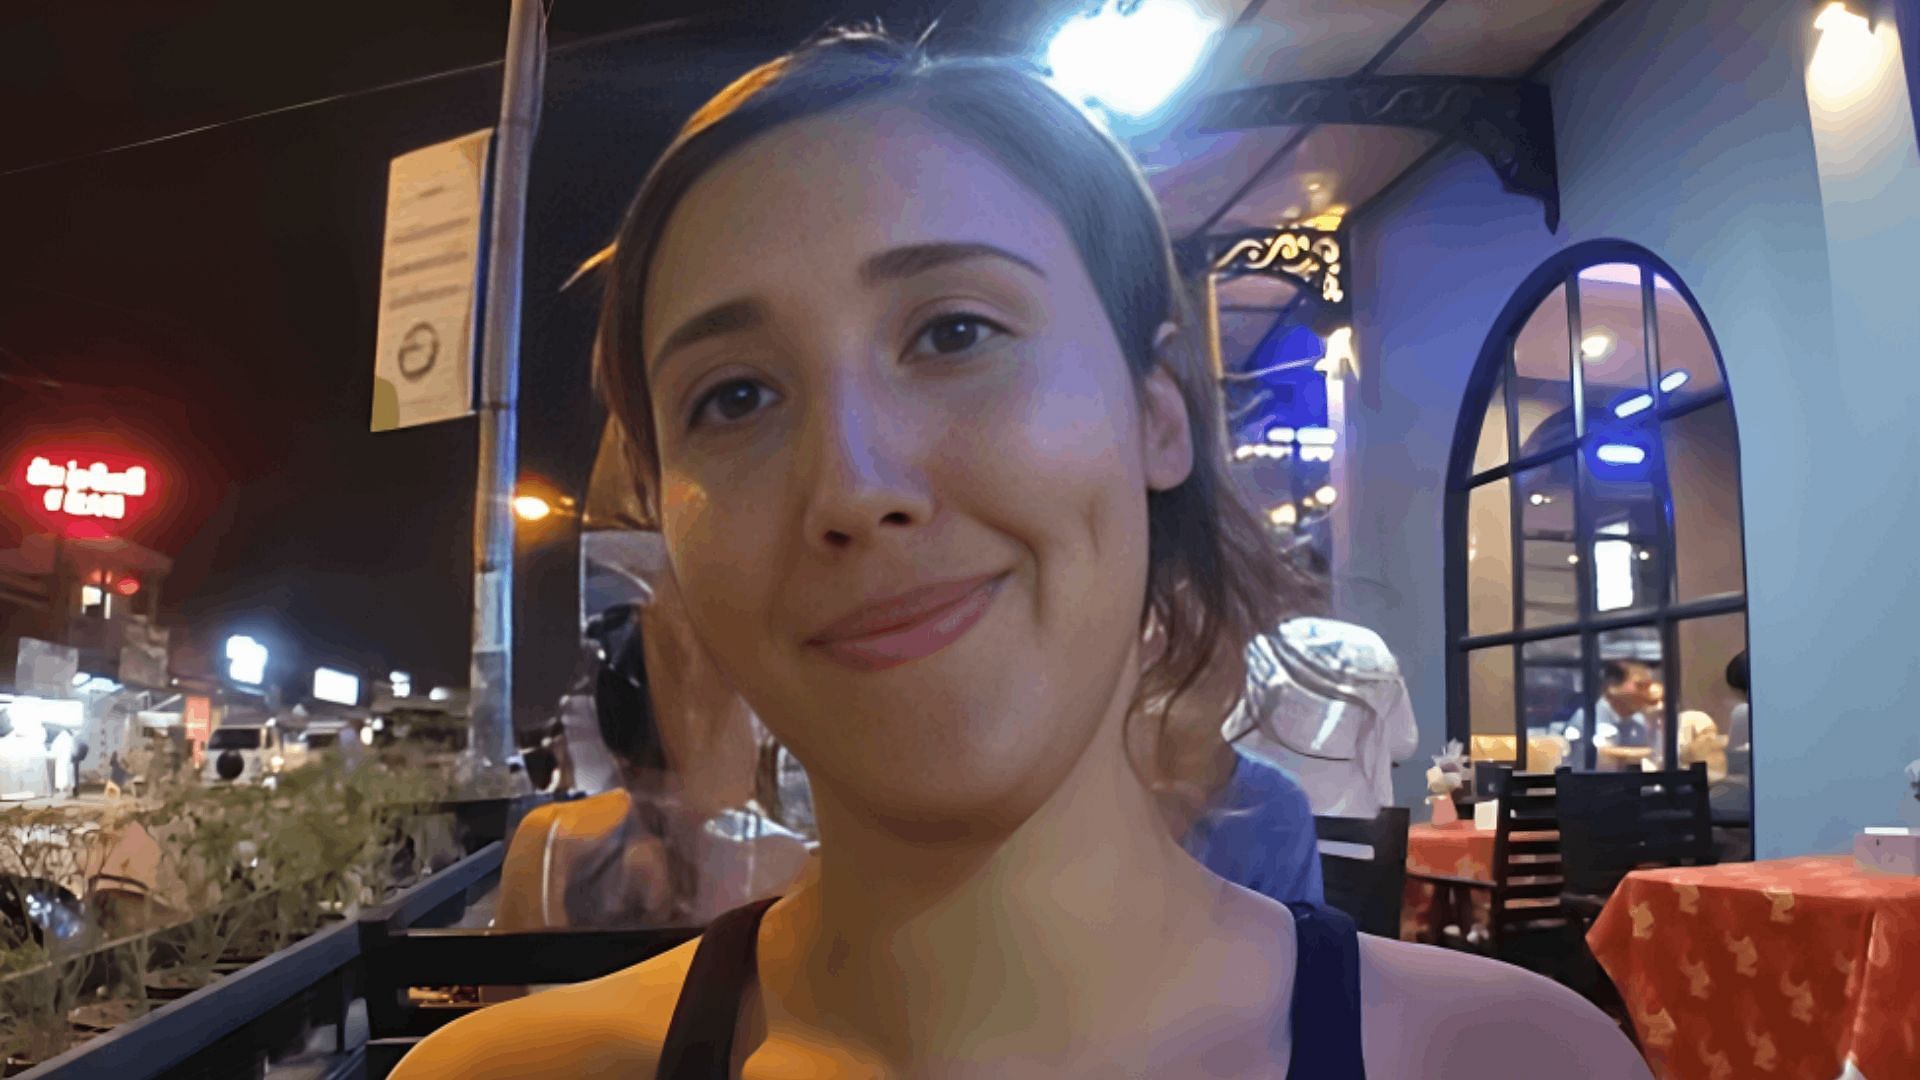 Justketh had a bizarre encounter with a tourist who asked her to stop streaming and pay for his meal (Image via justketh/Twitch)